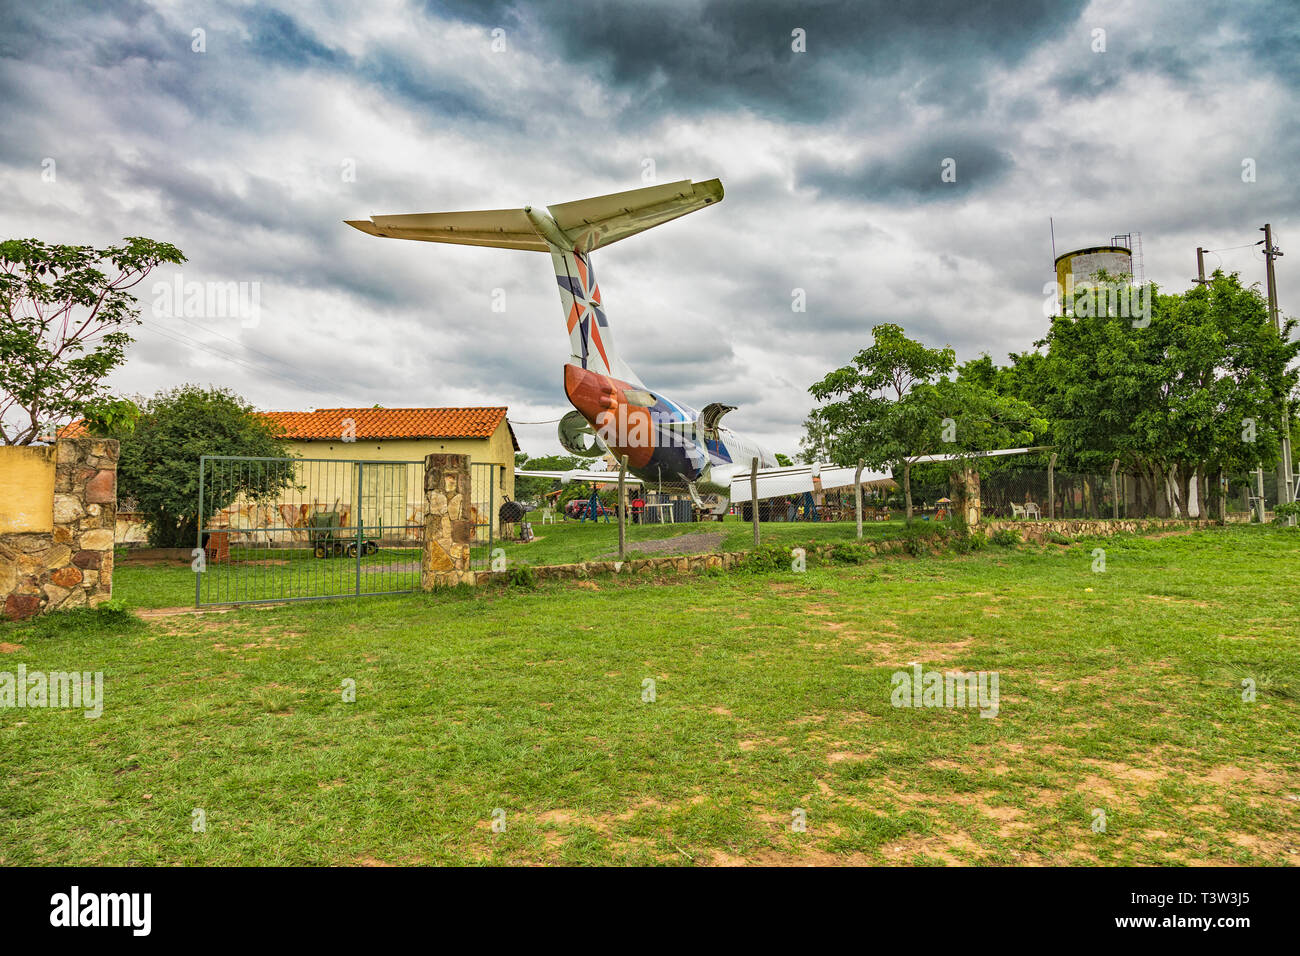 Discarded airplane on a private property in Paraguay. Stock Photo